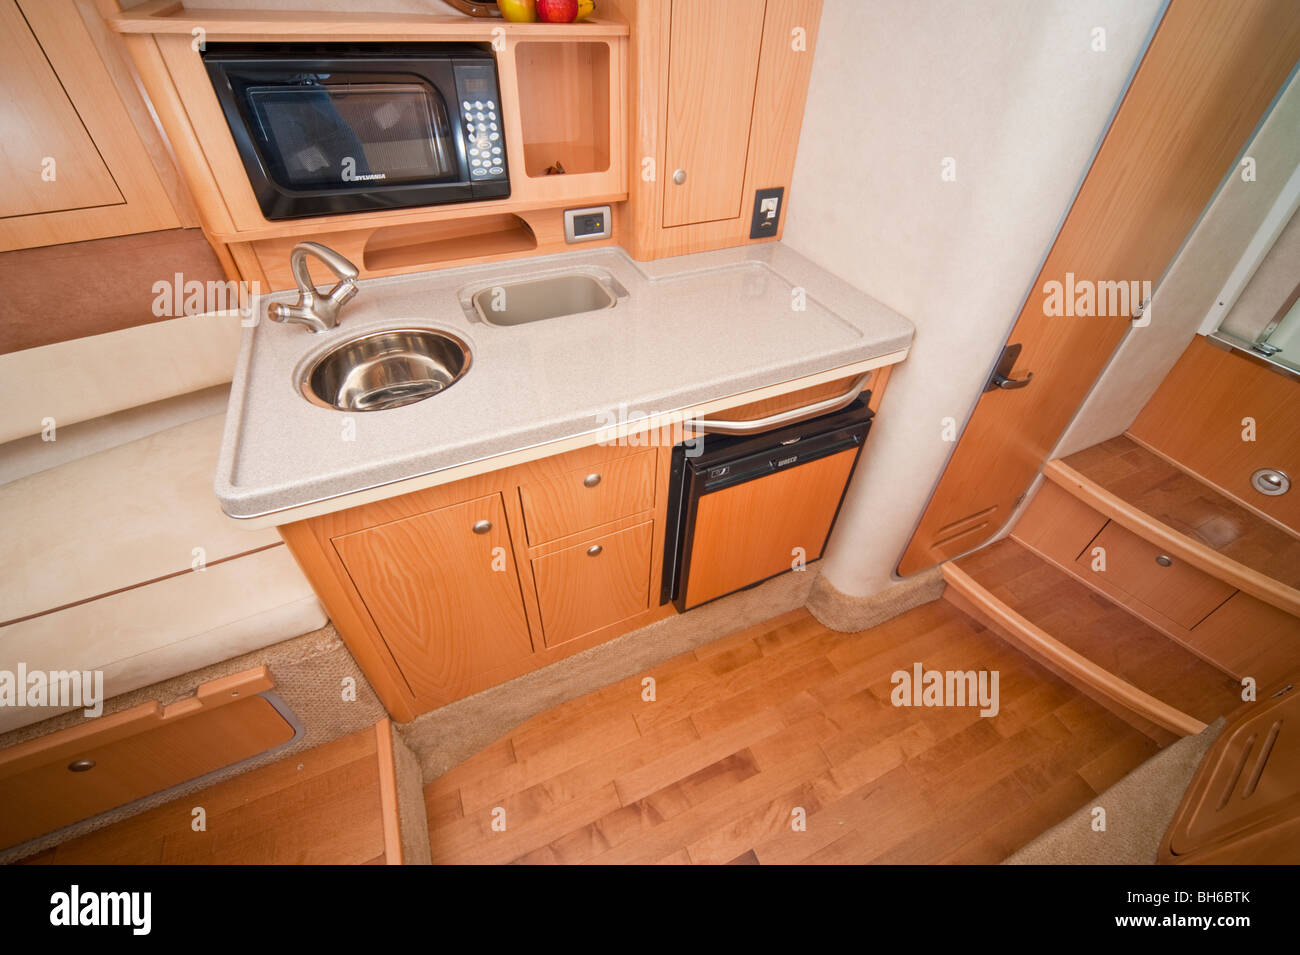 Kitchen, galley, in a Sea Ray 305 powerboat / yacht, 2009 model Stock Photo